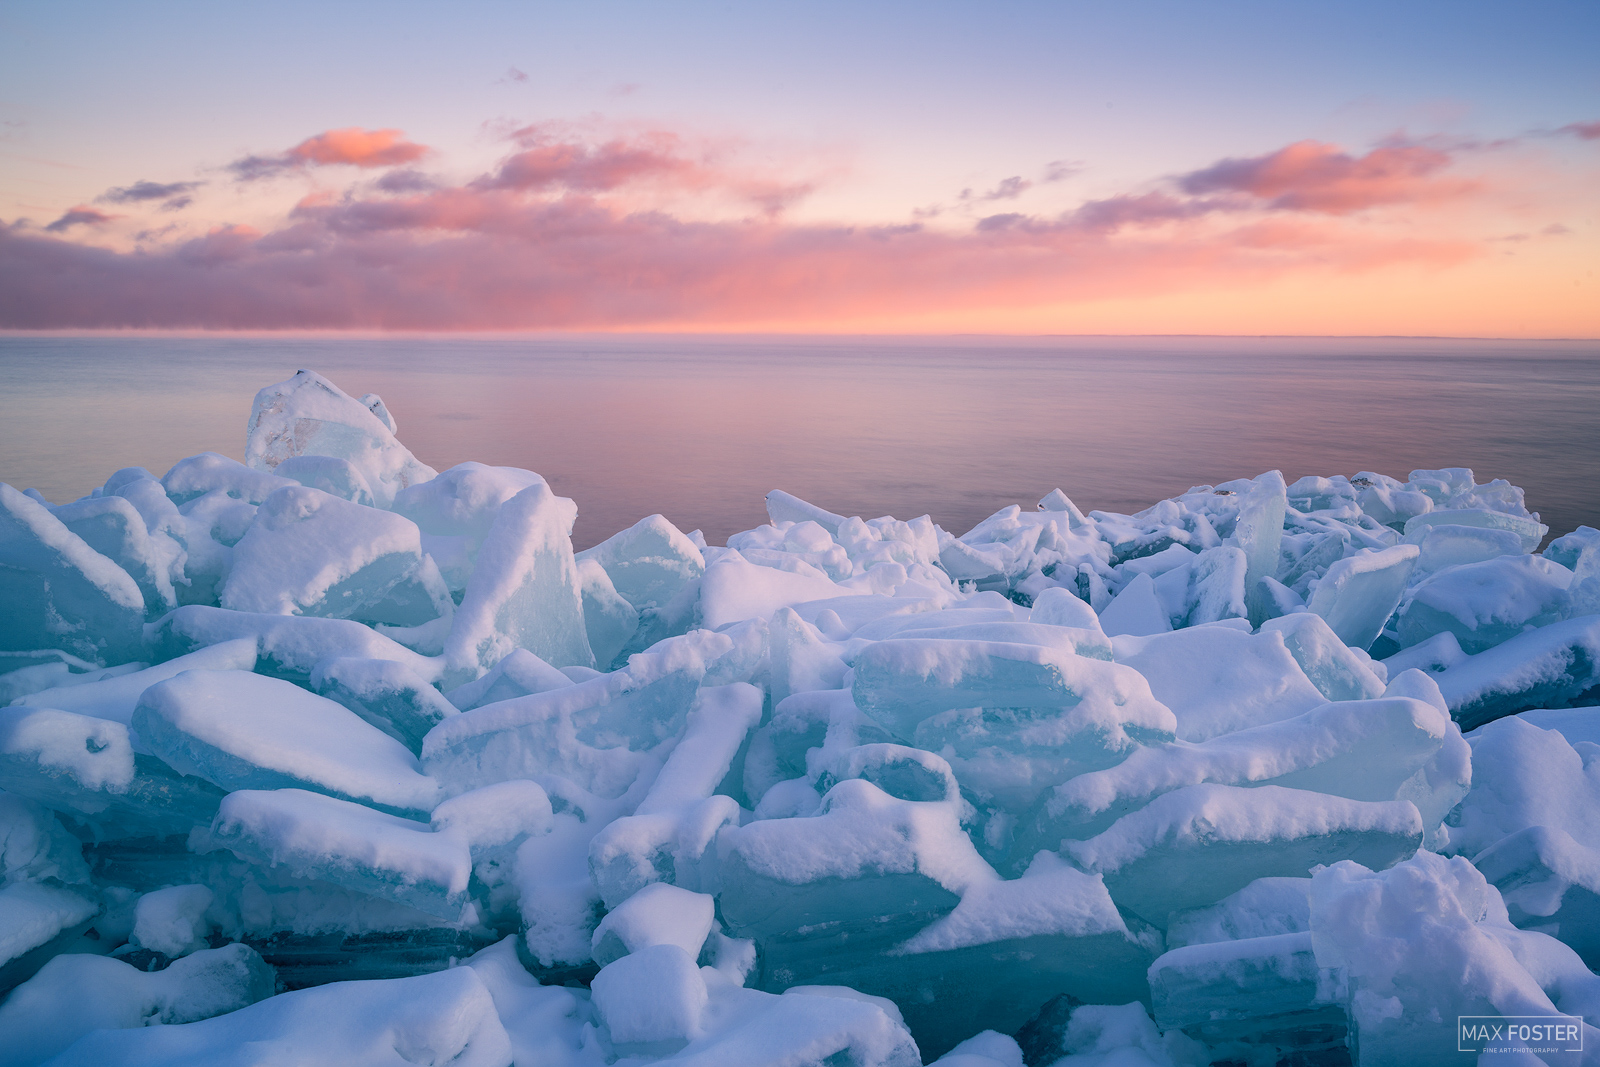 Transform your walls with Diamonds In The Rough, Max Foster's limited edition photography print of Lake Superior in winter from...